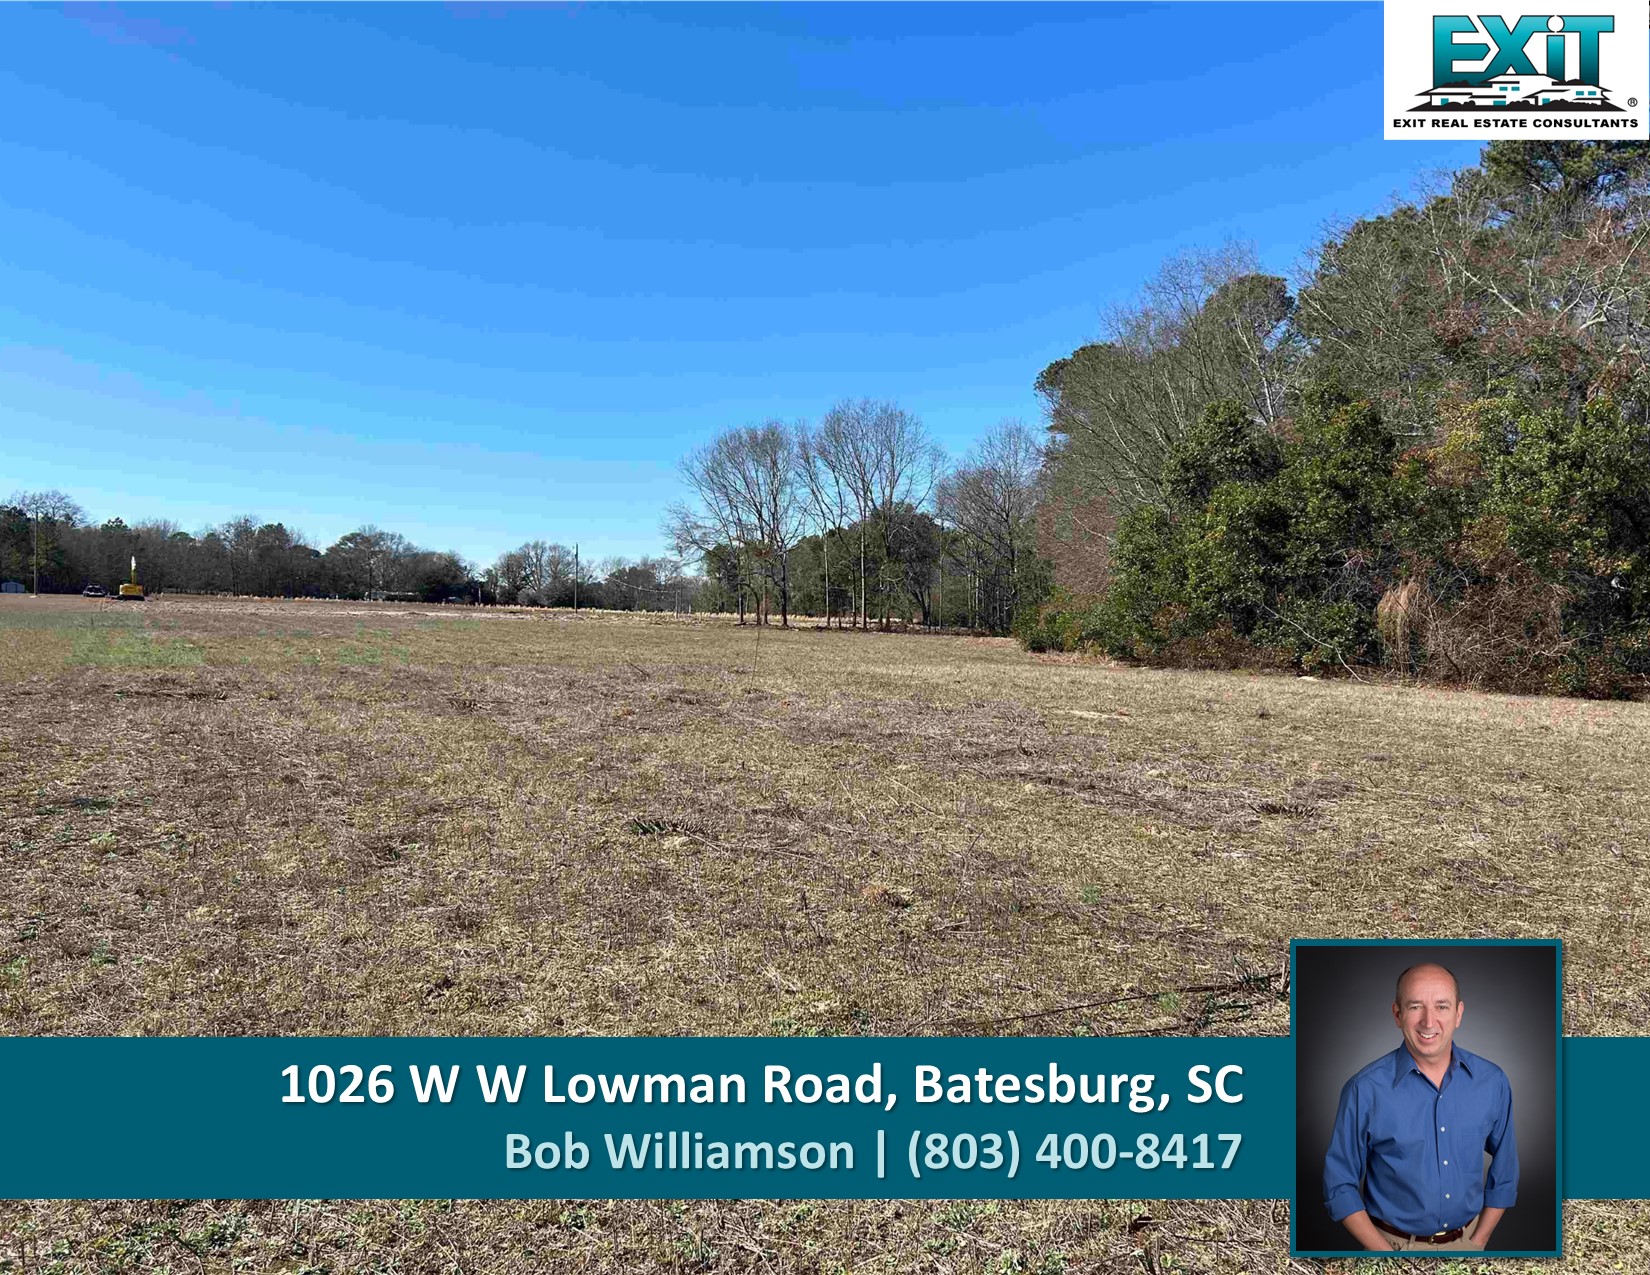 Just listed in Batesburg